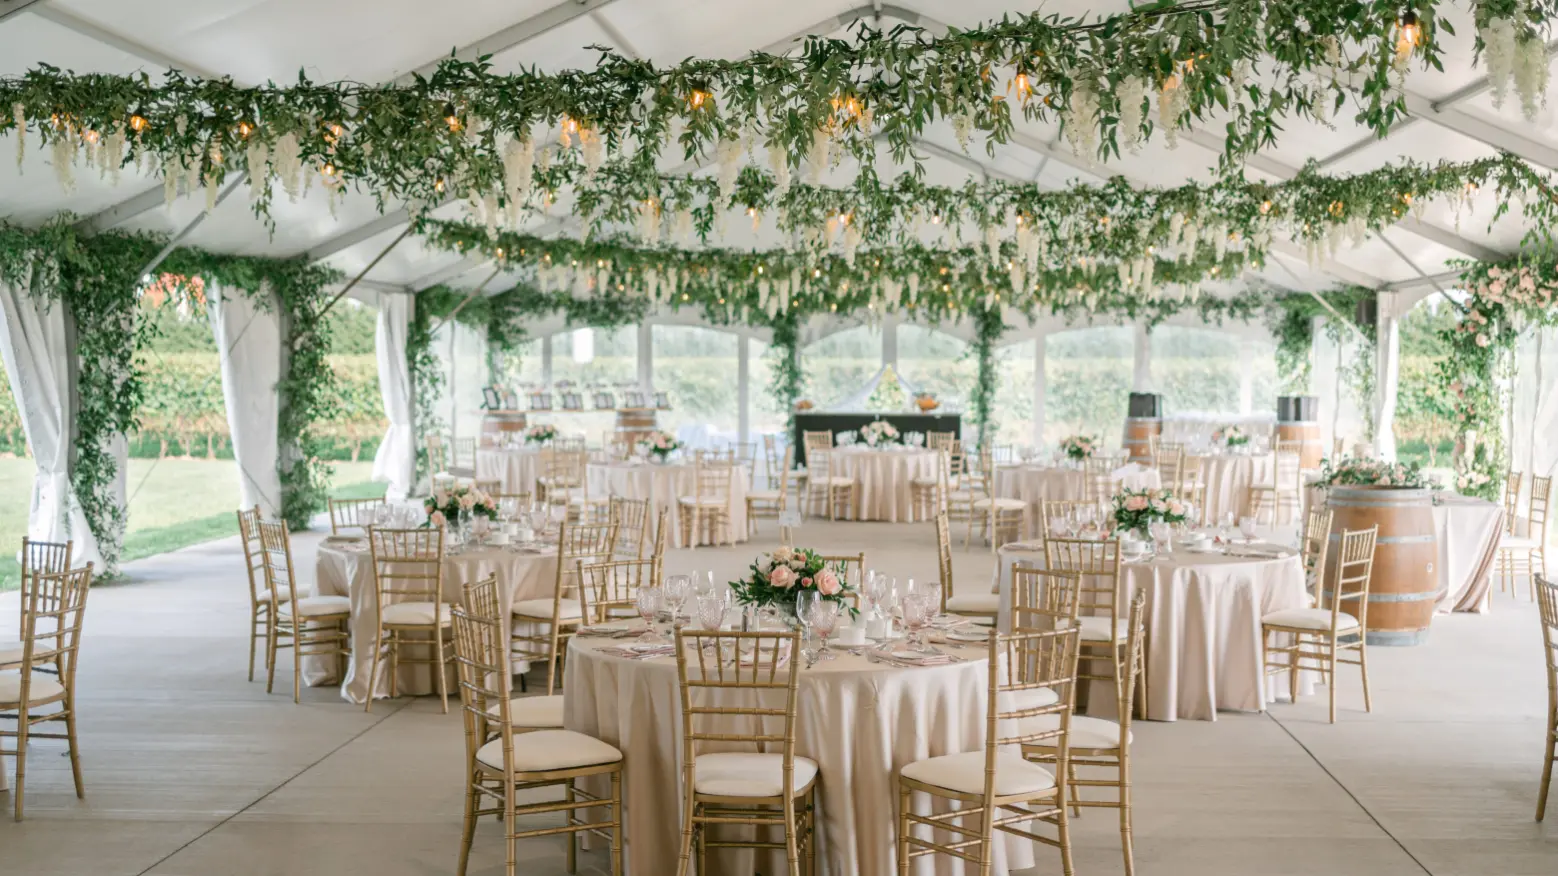 Décor Inspiration for Your Tented Wedding